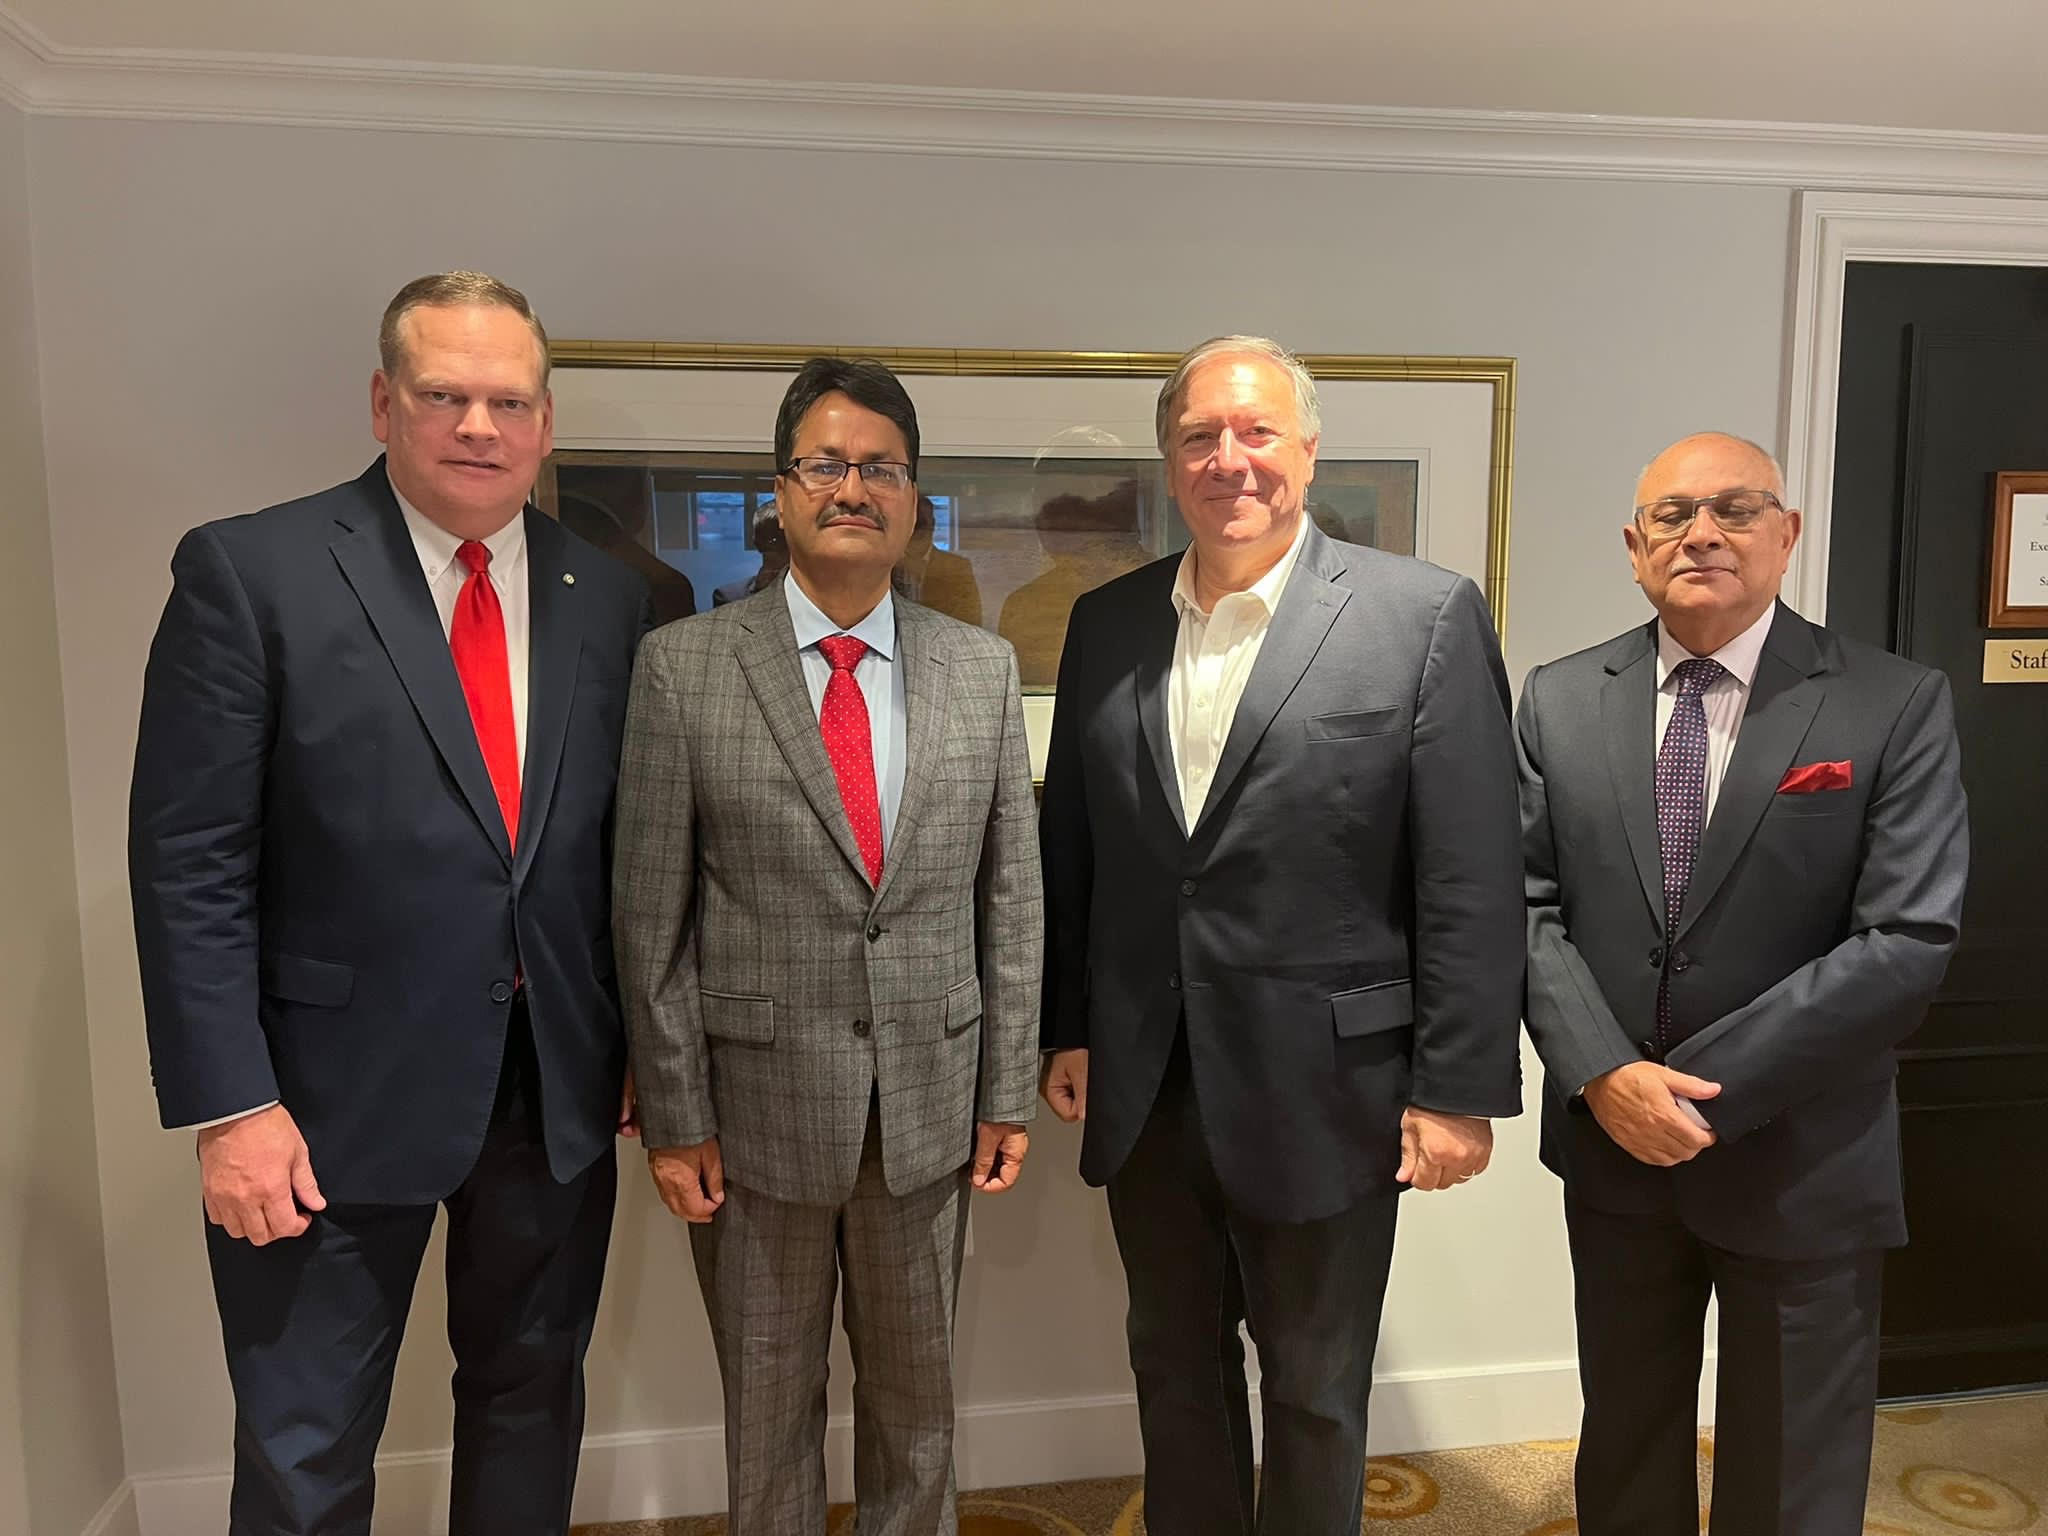 Foreign Minister Saud meets with former US Secretary of State Pompeo